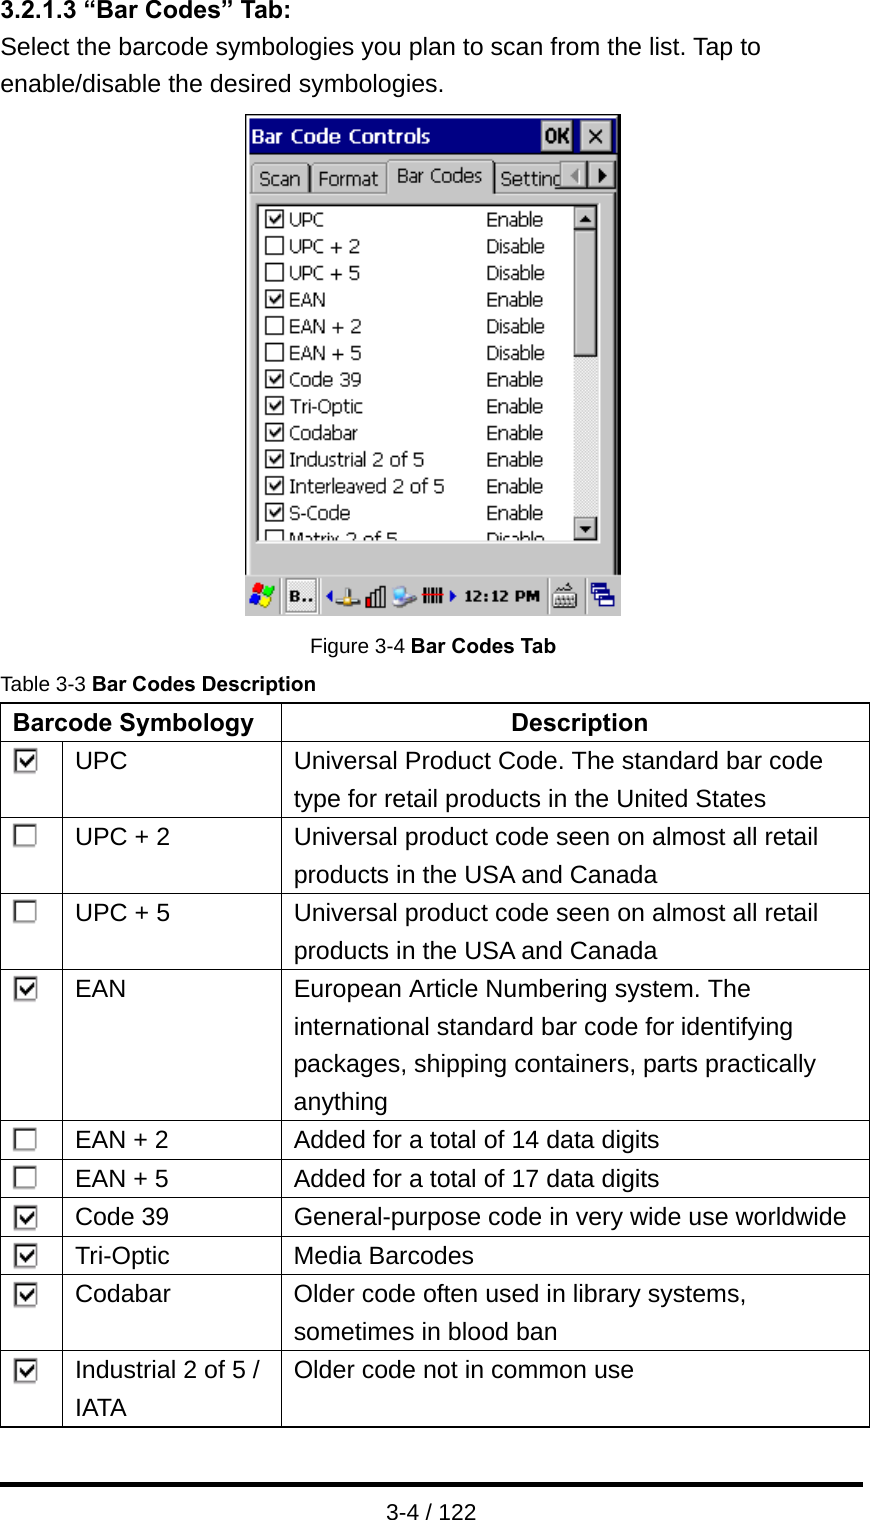  3-4 / 122 3.2.1.3 “Bar Codes” Tab: Select the barcode symbologies you plan to scan from the list. Tap to enable/disable the desired symbologies.  Figure 3-4 Bar Codes Tab Table 3-3 Bar Codes Description Barcode Symbology  Description  UPC Universal Product Code. The standard bar code type for retail products in the United States  UPC + 2 Universal product code seen on almost all retail products in the USA and Canada  UPC + 5 Universal product code seen on almost all retail products in the USA and Canada  EAN European Article Numbering system. The international standard bar code for identifying packages, shipping containers, parts practically anything  EAN + 2 Added for a total of 14 data digits  EAN + 5 Added for a total of 17 data digits  Code 39 General-purpose code in very wide use worldwide  Tri-Optic Media Barcodes  Codabar  Older code often used in library systems, sometimes in blood ban  Industrial 2 of 5 / IATA Older code not in common use 